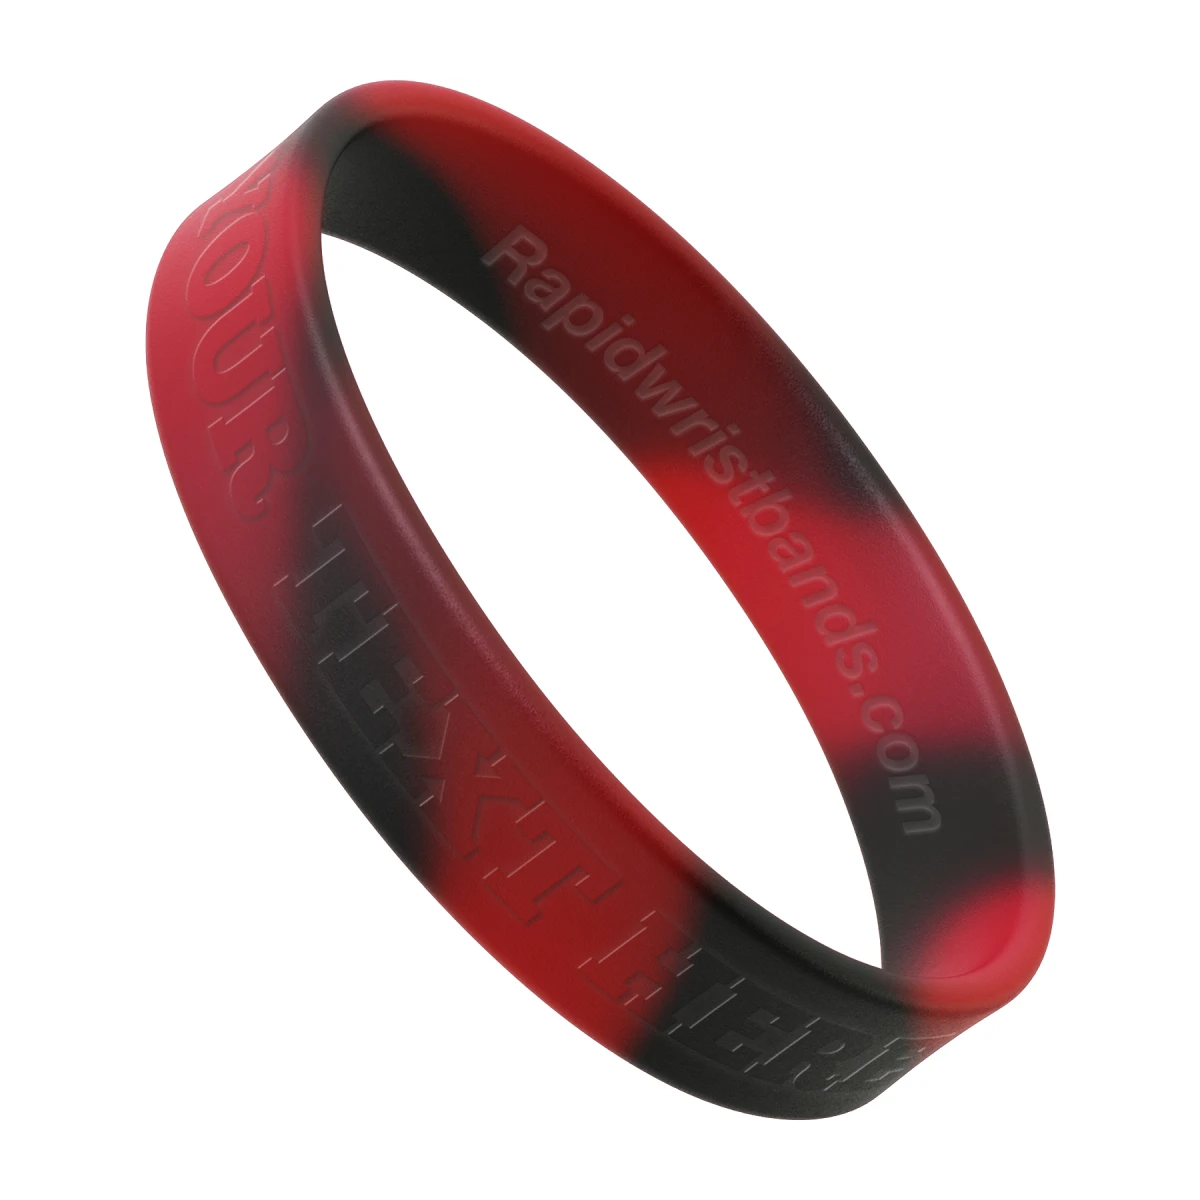 Swirl Red/Black Wristband With Your Text Here Embossed